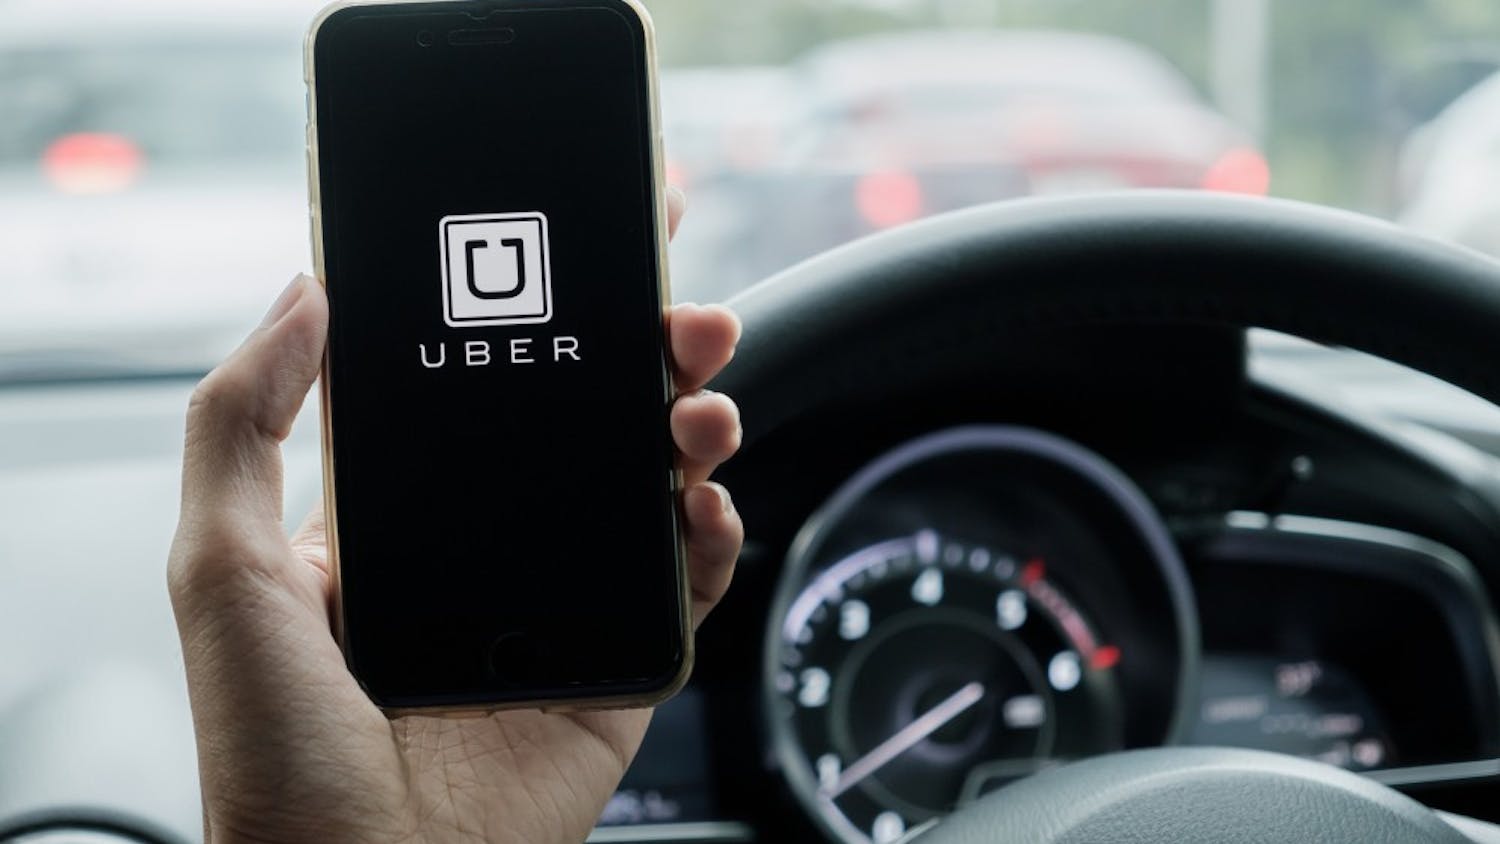 Uber driver targeted by rumor: 'There has never been a knife in my vehicle'